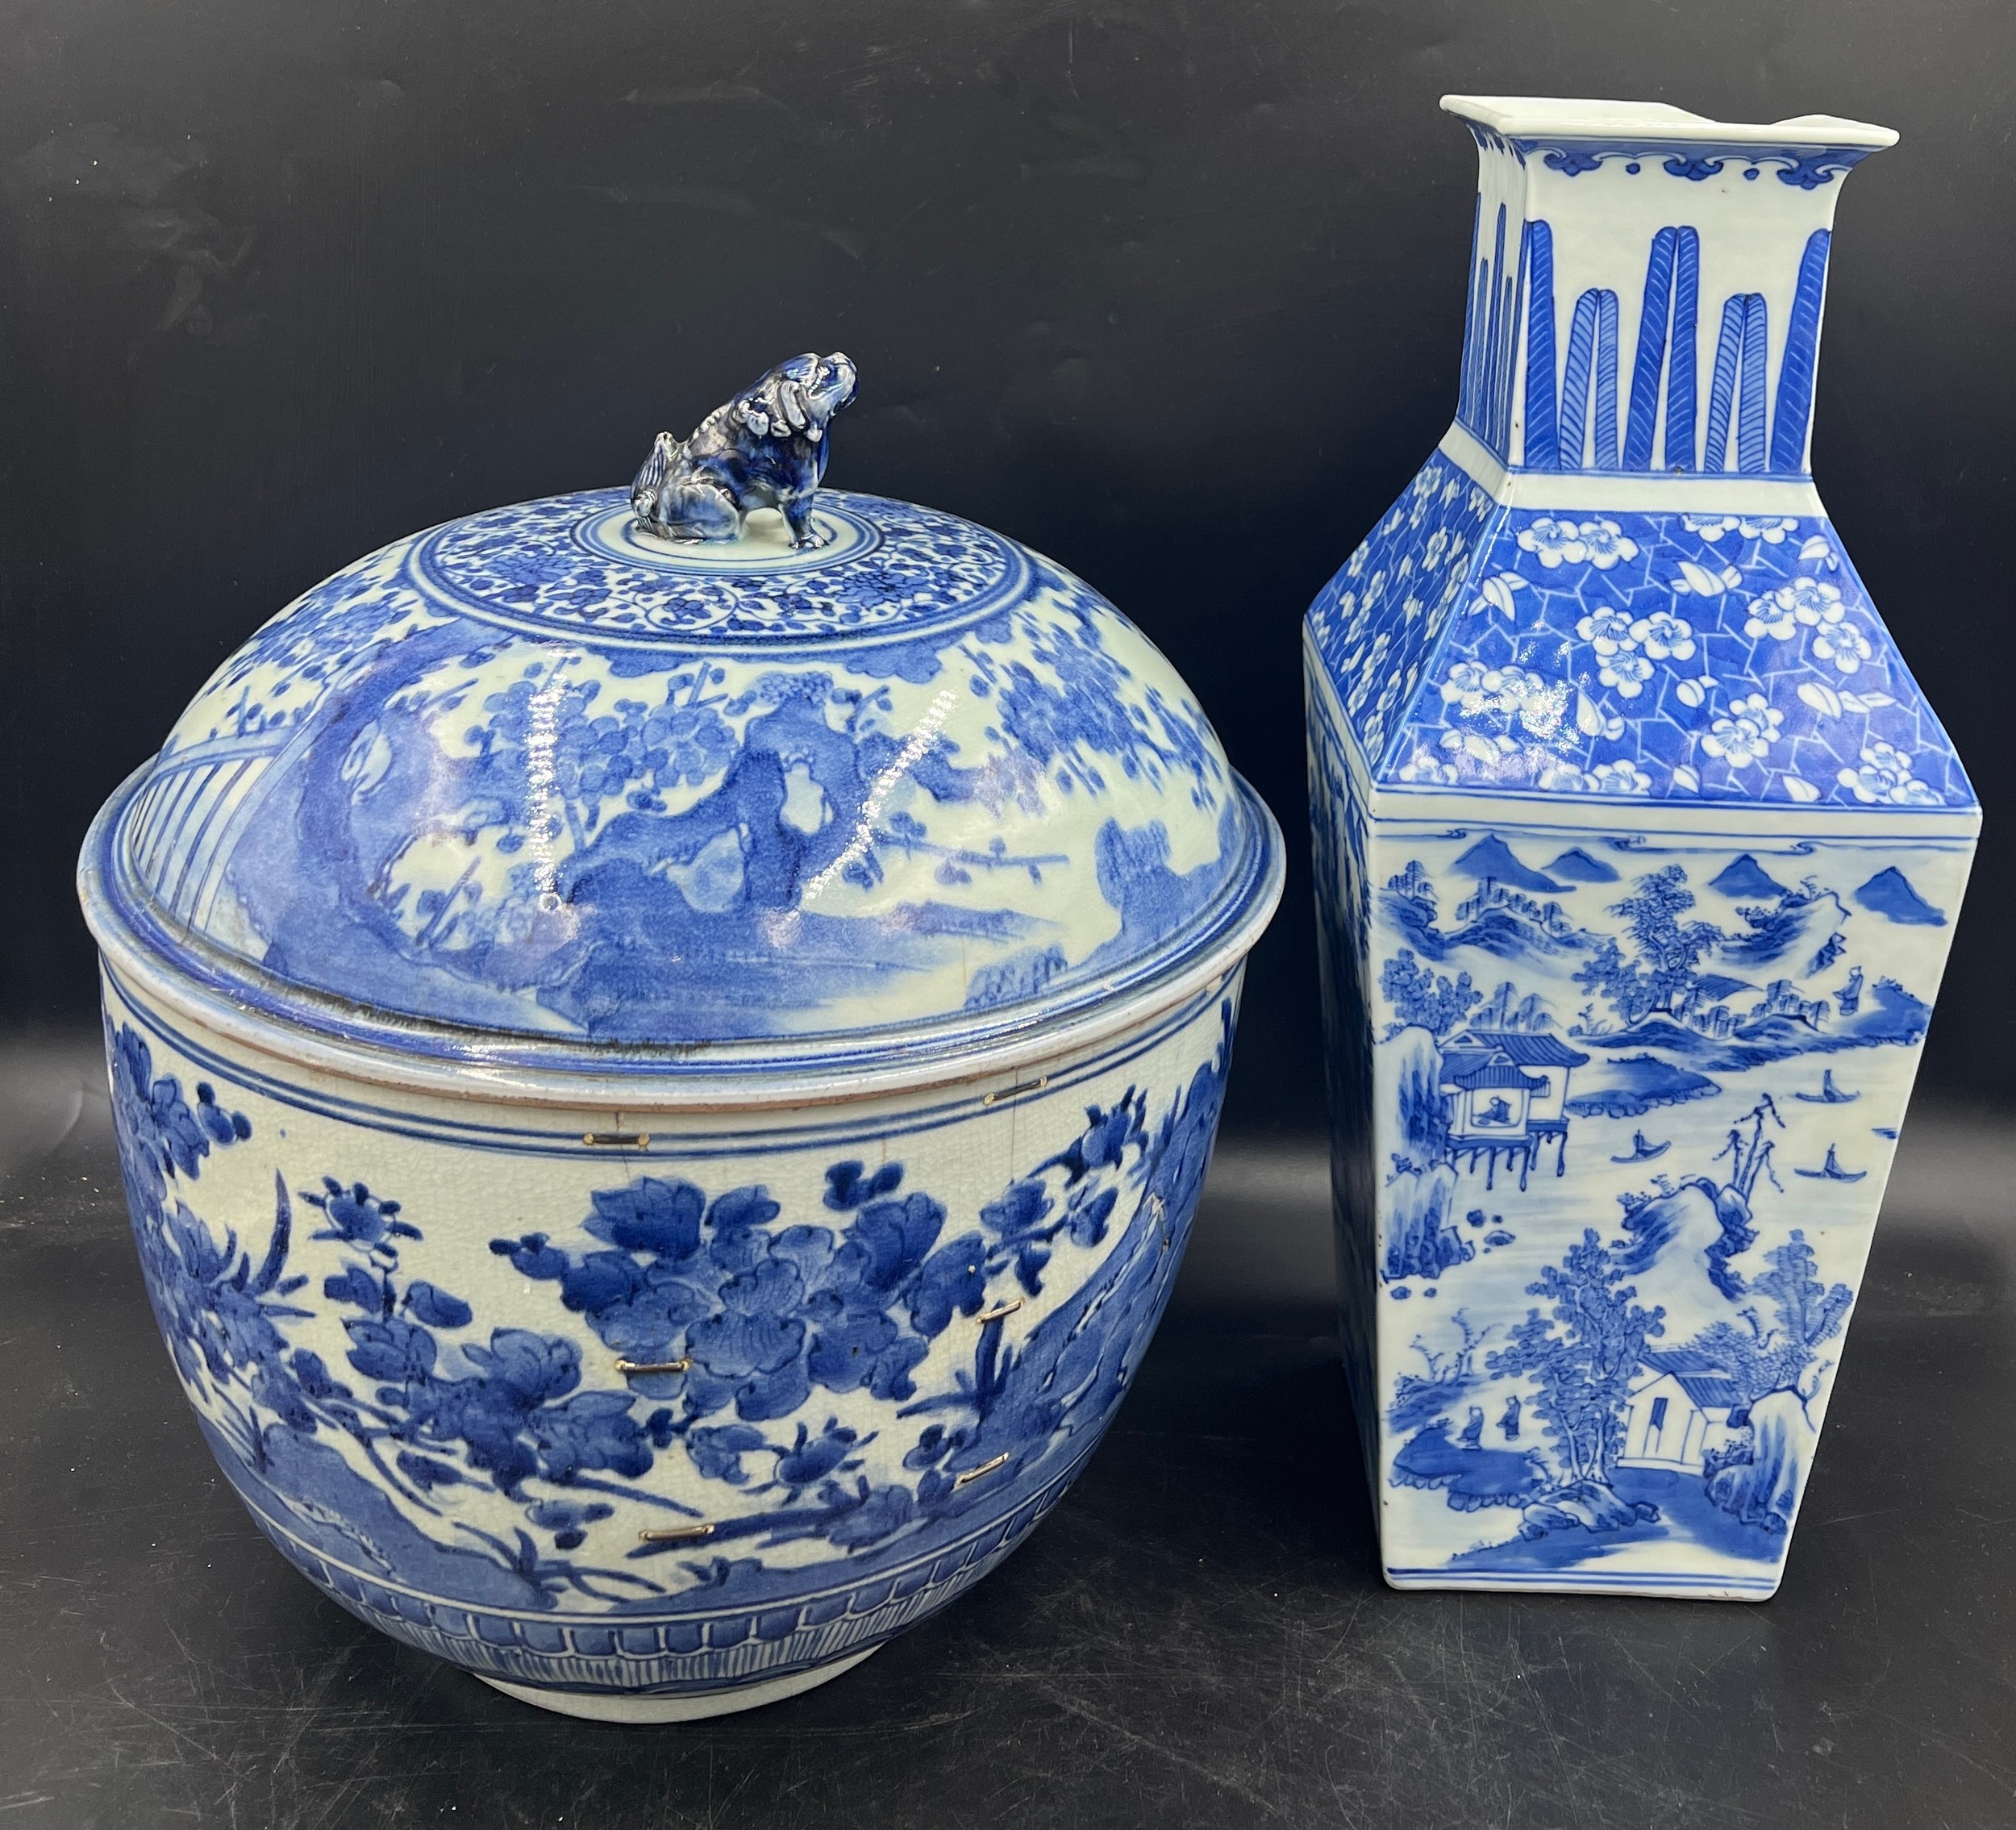 Chinese ceramics to include a large lidded blue and white bowl with foo dog finial and old stapled